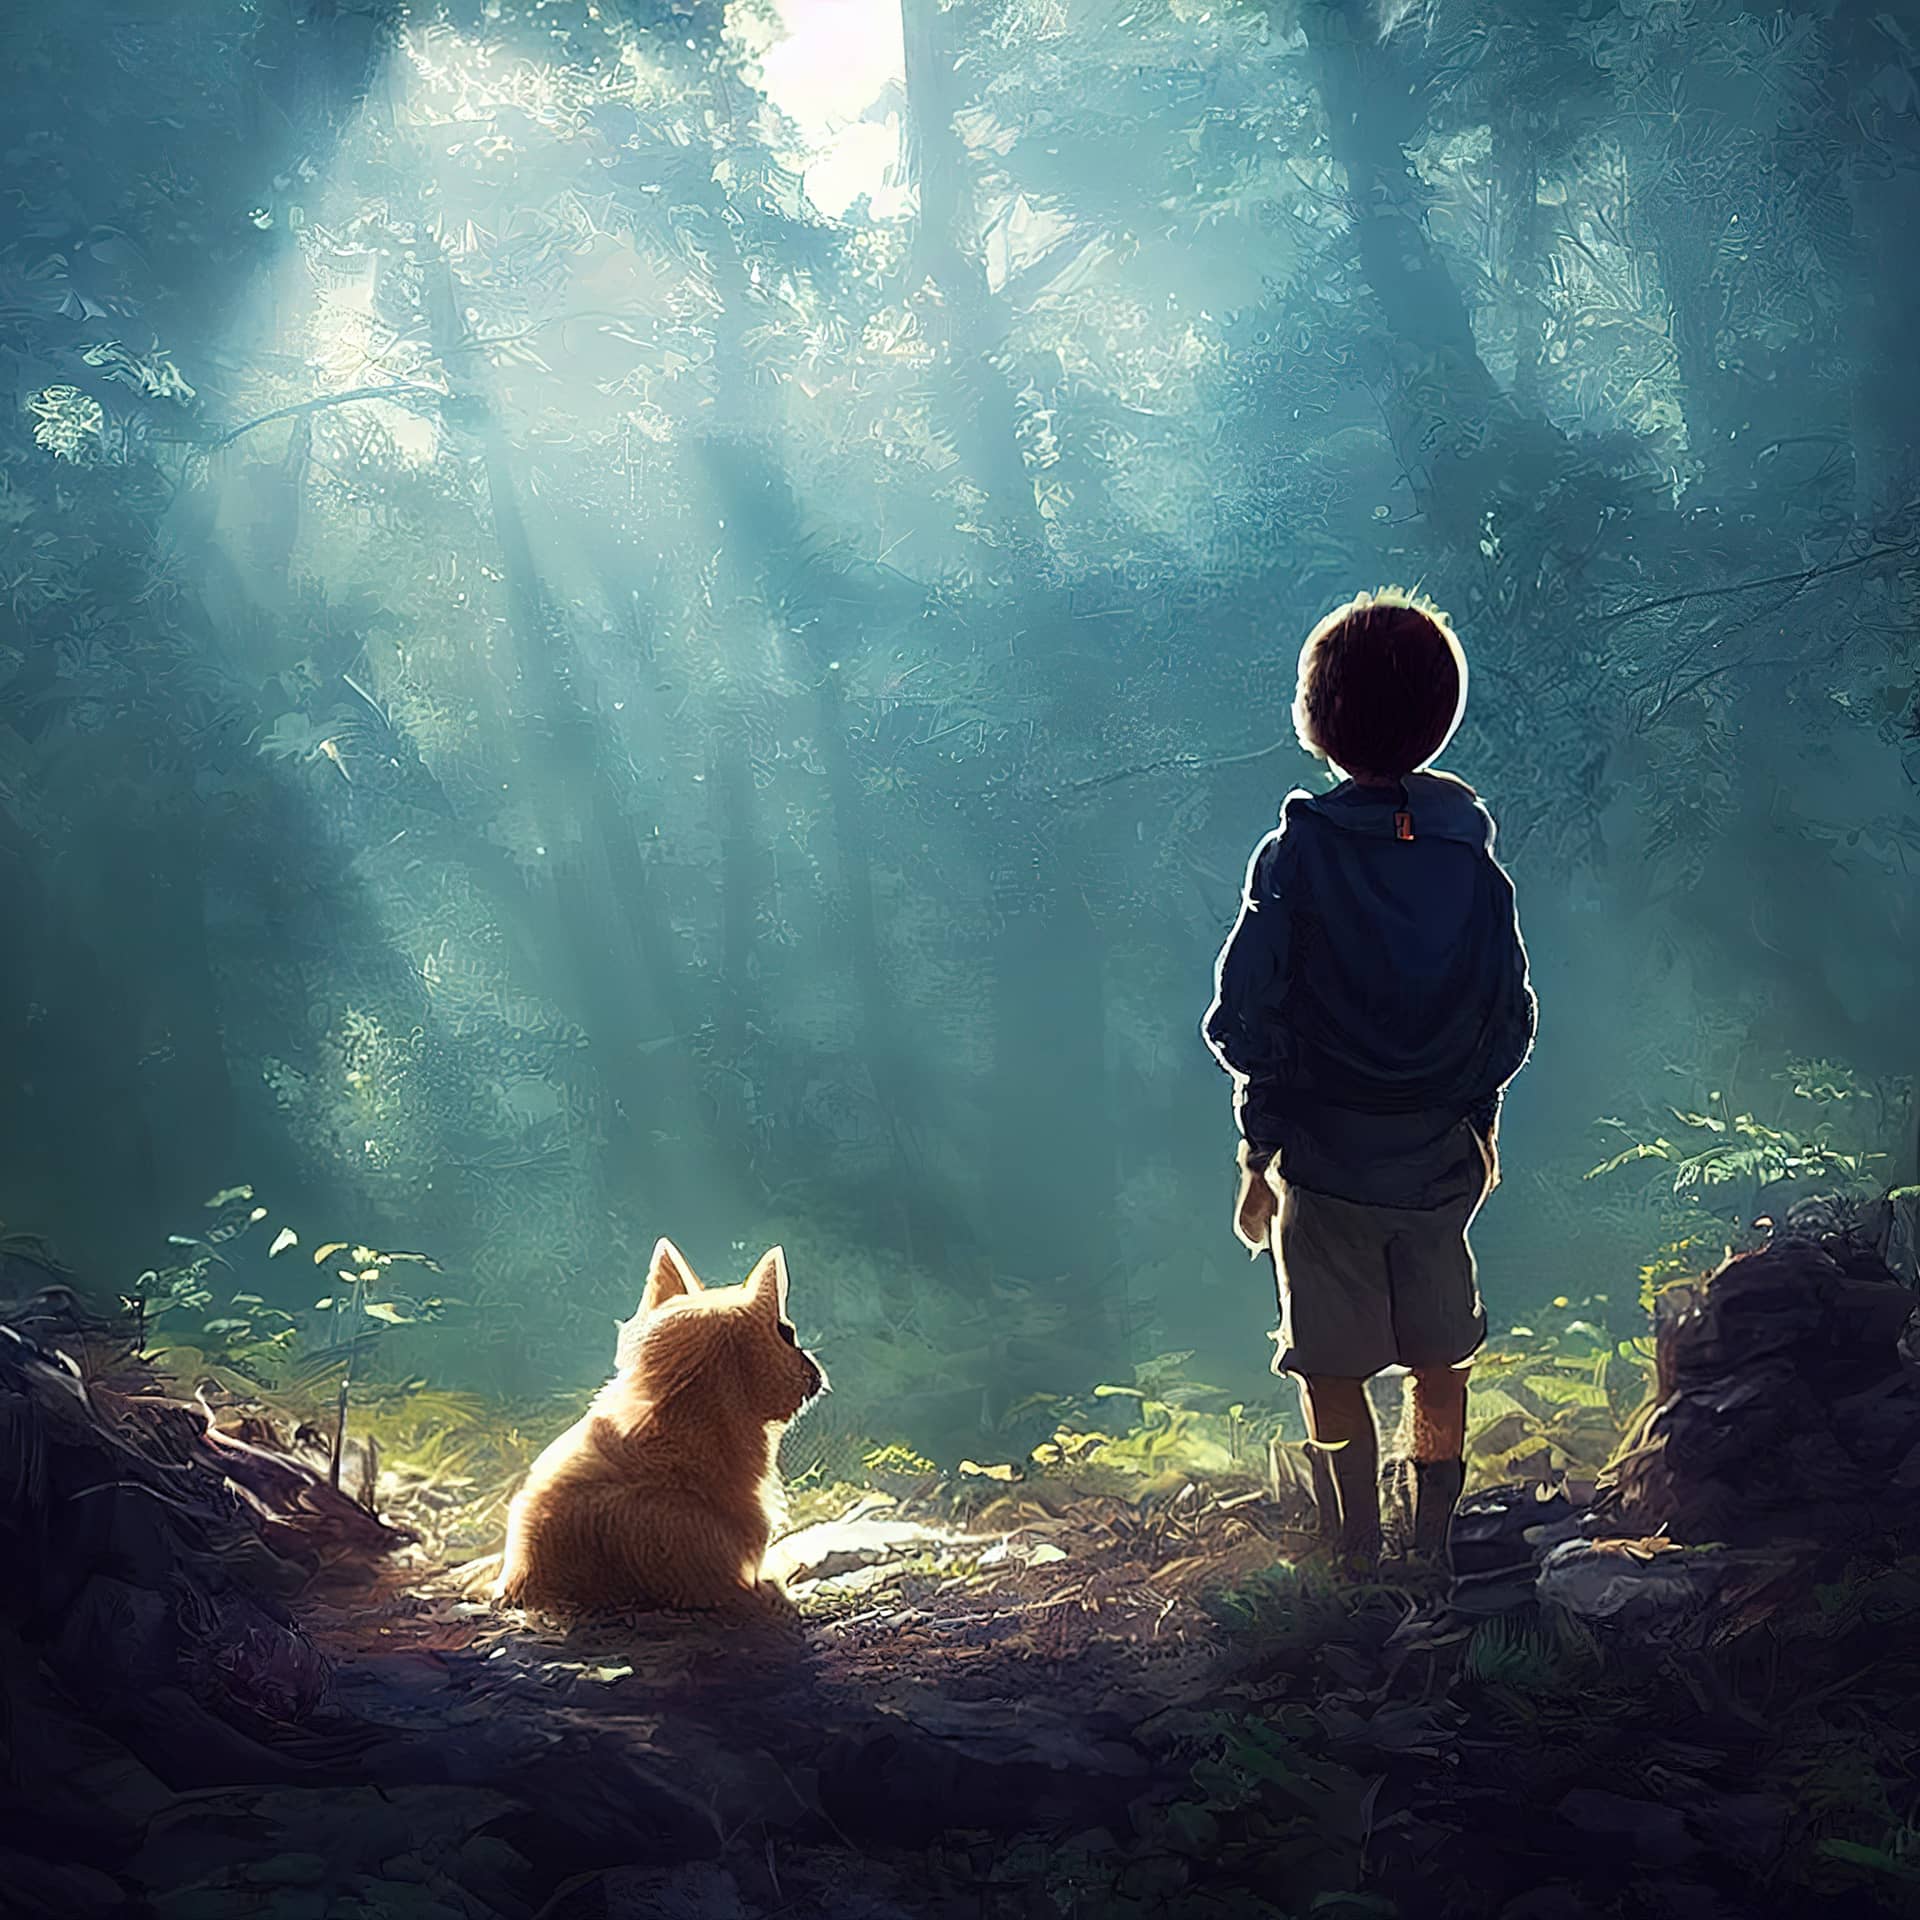 His puppy are standing clearing looking foggy forest 3d illustration